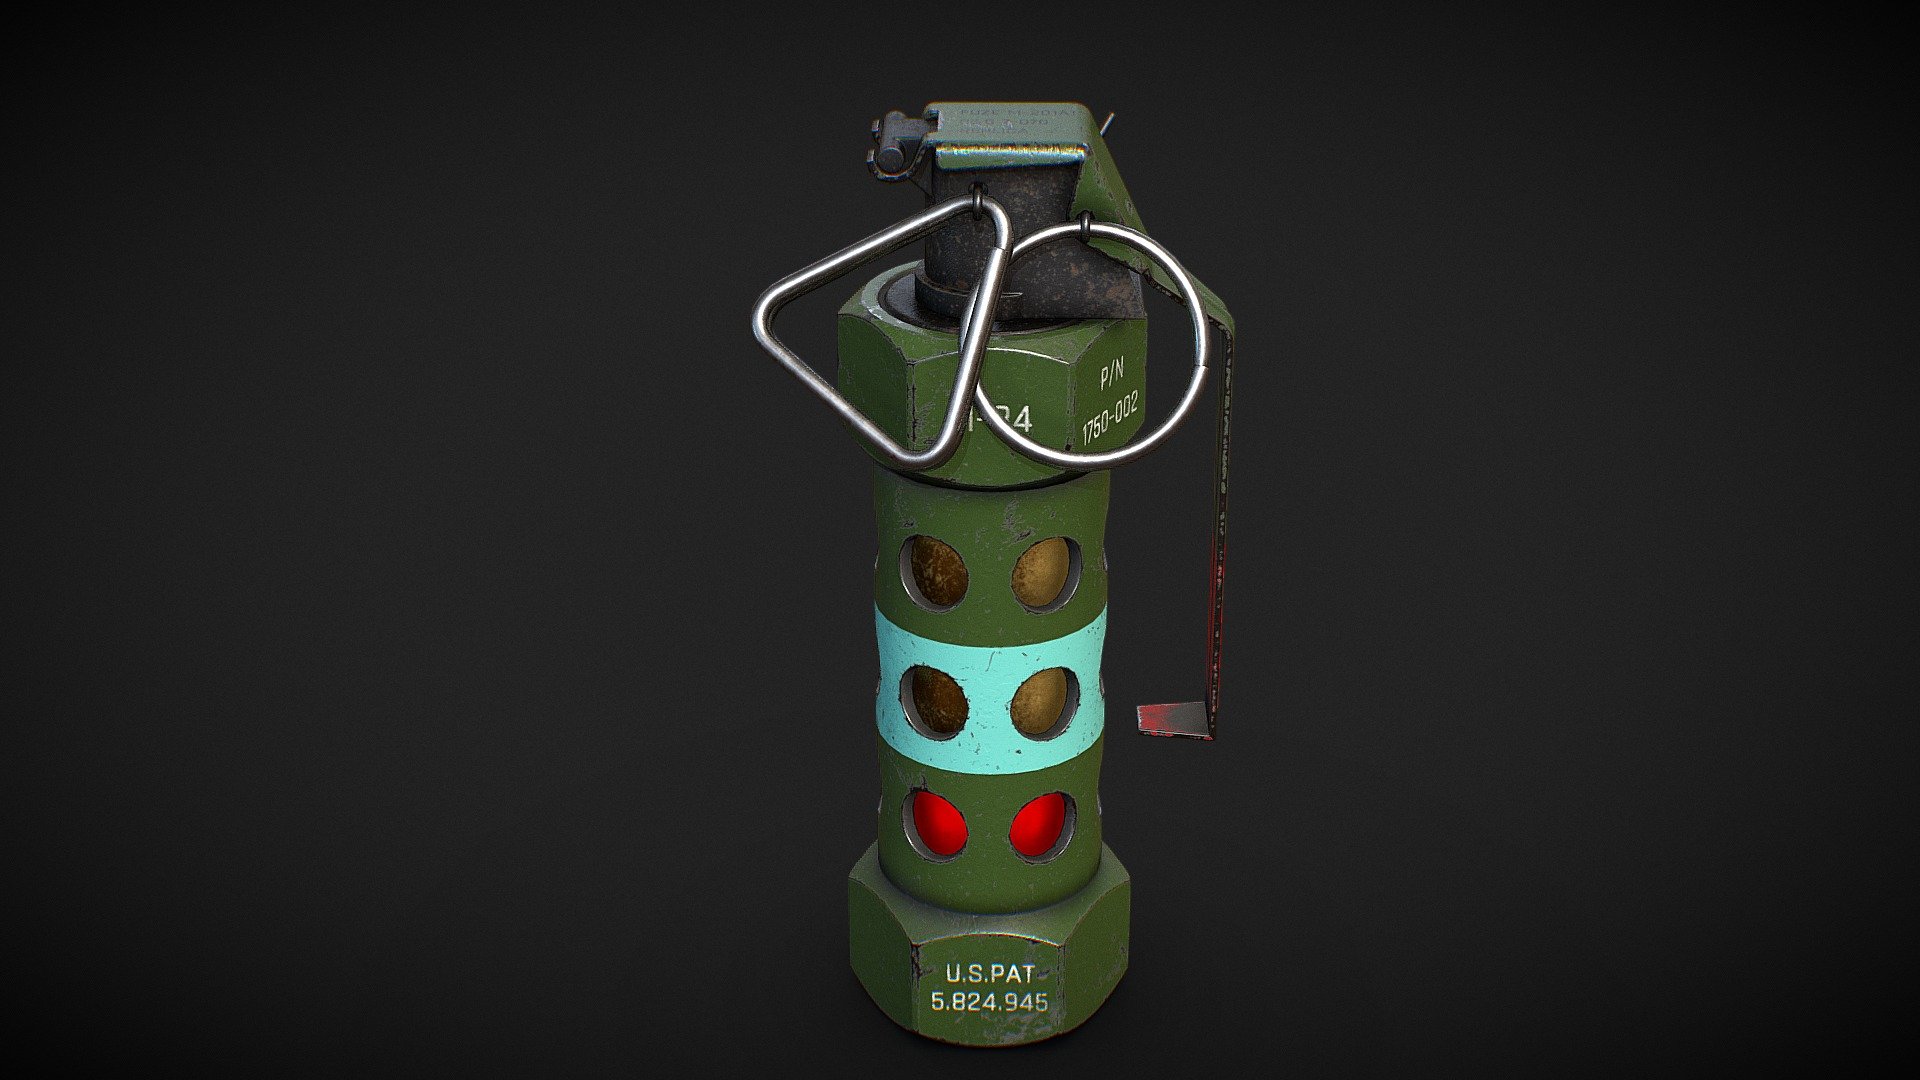 &mdash;General Information&mdash;

Lowpoly, optimized for modern game engines.

Made using real world scales

High quality 4k textures

Created to be used in a modern engine that supports physically based rendering (PBR) comes with textures optimized for Unreal Engine 4 and Unity 5.

-Detailed Model Specifications-

Model contains 5 separate objects and are ready to be rigged. the objects are:

Grenade Body
Fuze Body
PingRing
SafetyRing
SafetyLever
Geometry :

Polygon : 7414

Vertices : 3742

Tris: 7414

-Texture Information-

All 4k Texture (All textures are in .tga format)

Unreal:

&ndash; Base color

&ndash; OcclusionGroughnessMetallic

&ndash; Normal

Unity:

-Albedo

-Normal

-MetalicSmootness

-Occlusion

Please leave your reviews and comments to help my store grow. thanks

https://www.artstation.com/gameweapons - FlashBang Grenade M84 - Buy Royalty Free 3D model by GameWeapons 3d model